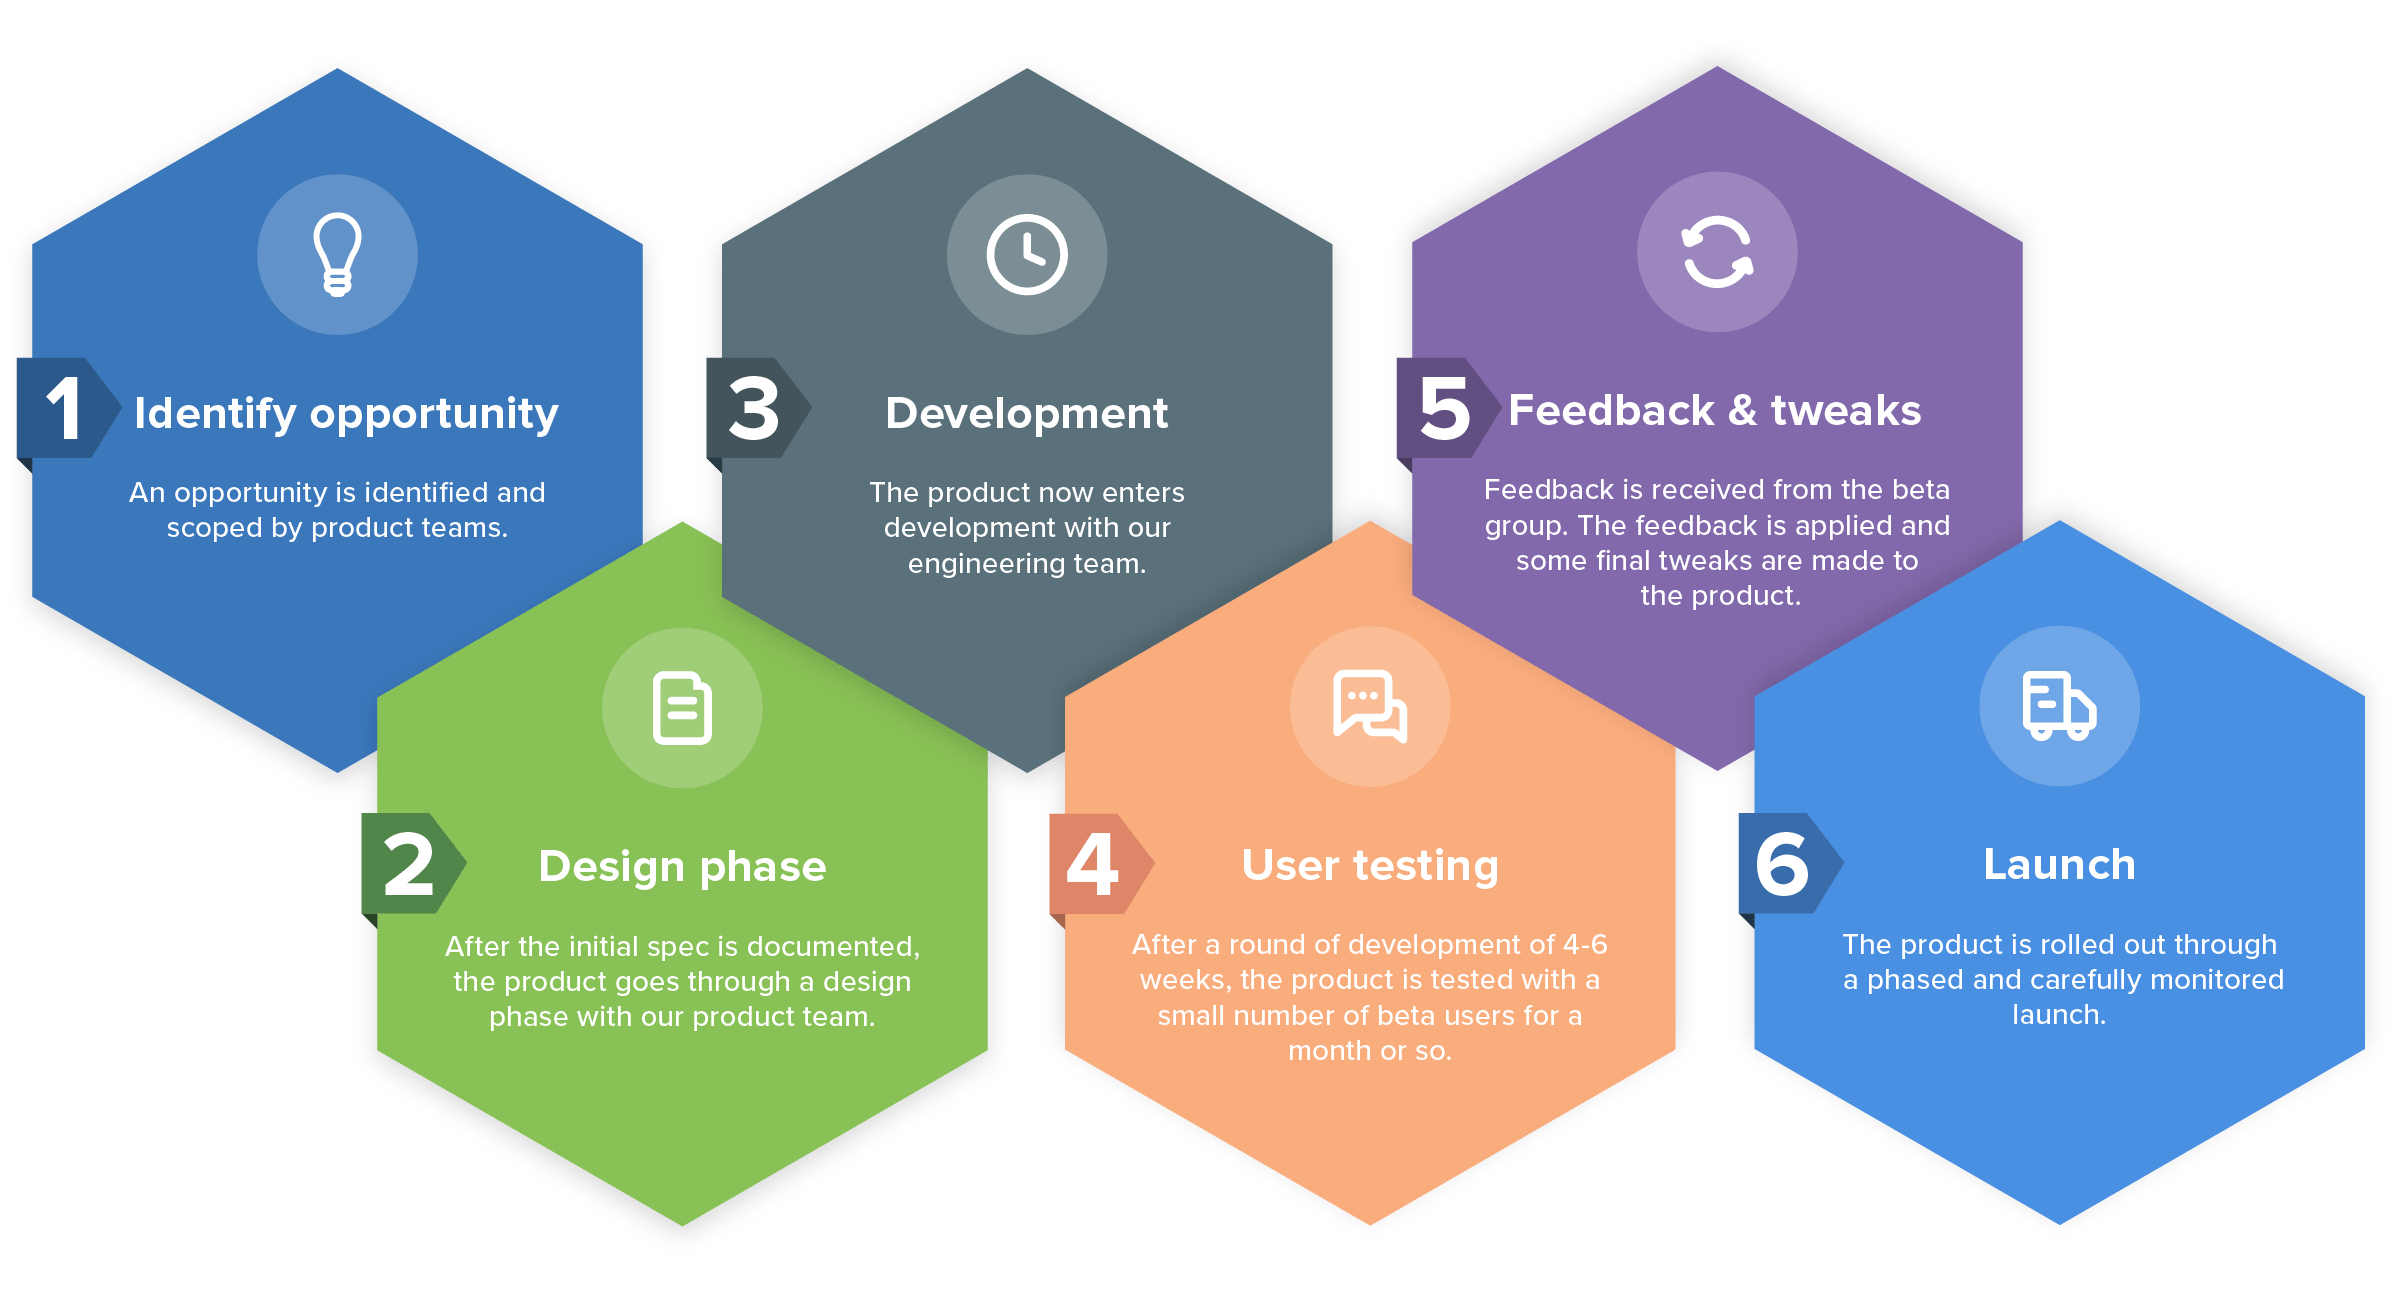 Infographic showing 6 phases of product development process: 1 opportunity; 2 design; 3 development; 4 user testing; 5 feedback; 6 launch